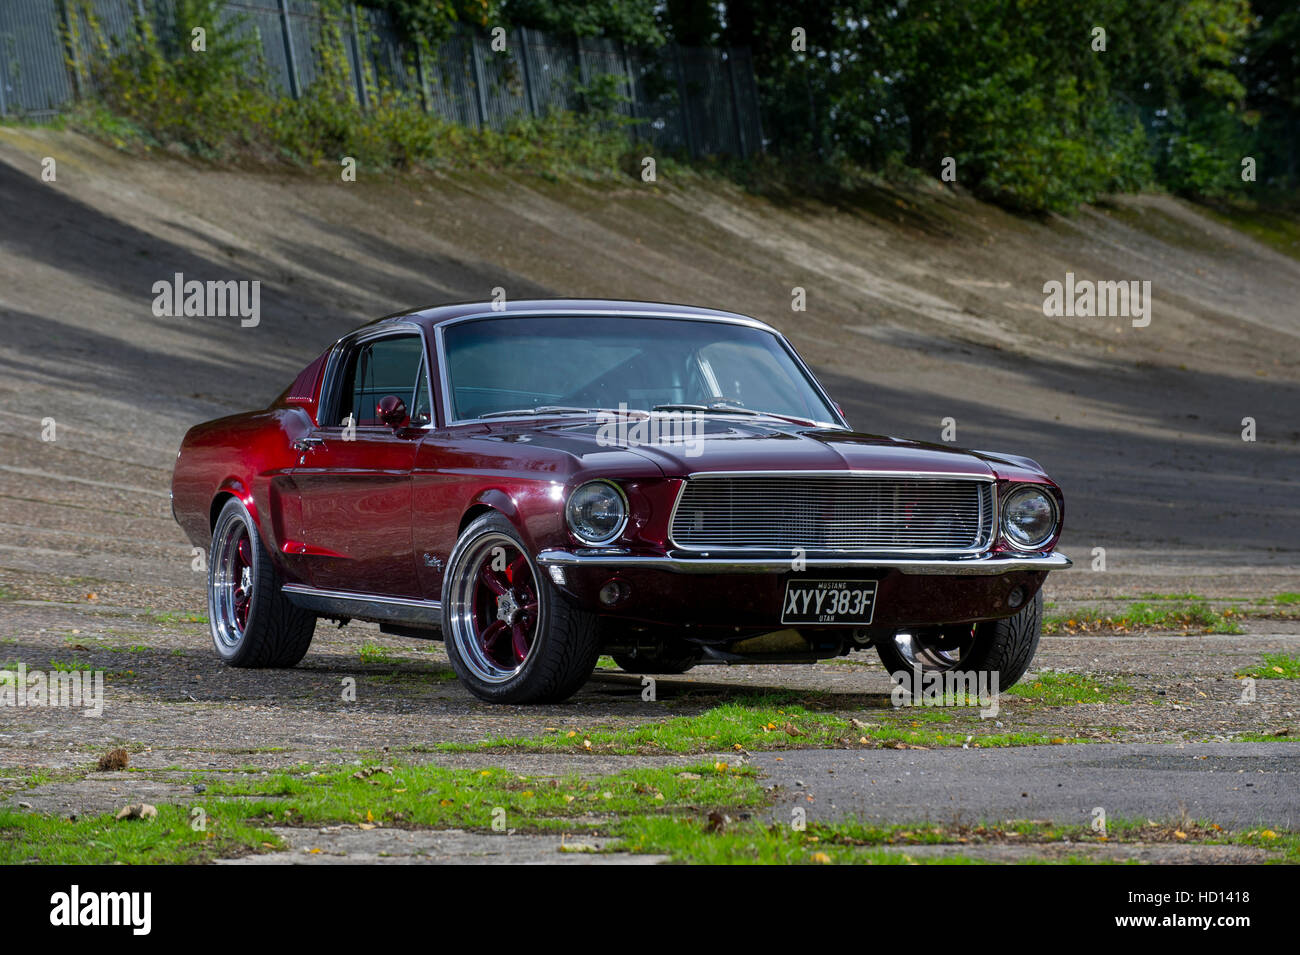 Ford Mach 1 Mustang GT classic American sports car Stock Photo - Alamy